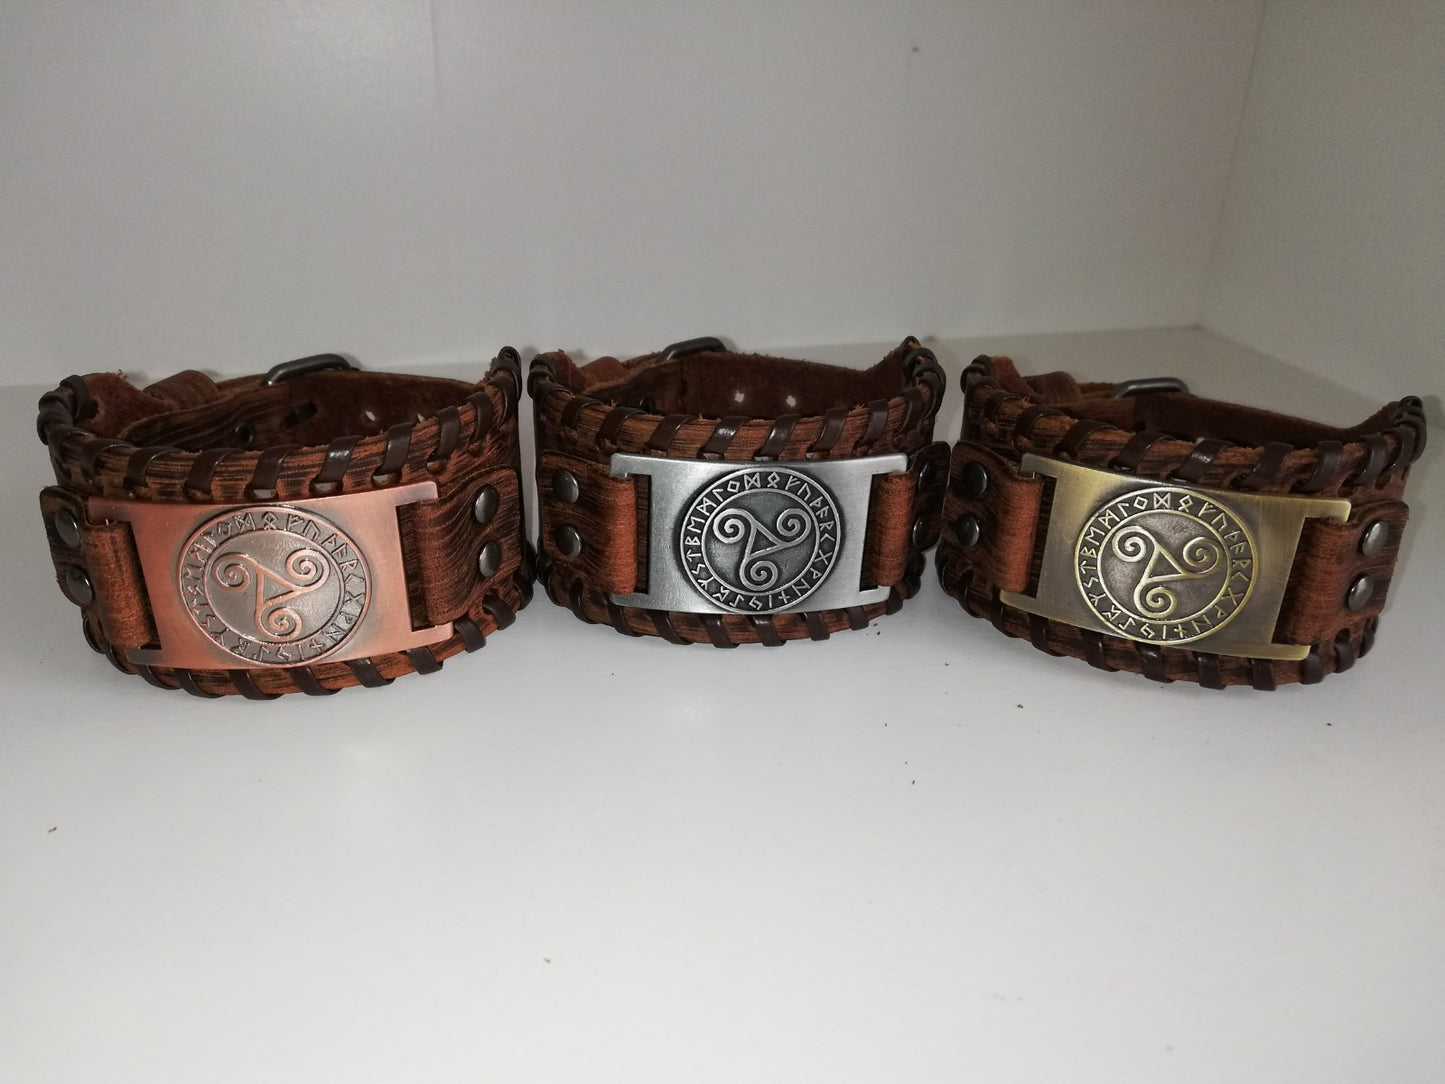 Brown leather bracelet with gold colored BDSM logo